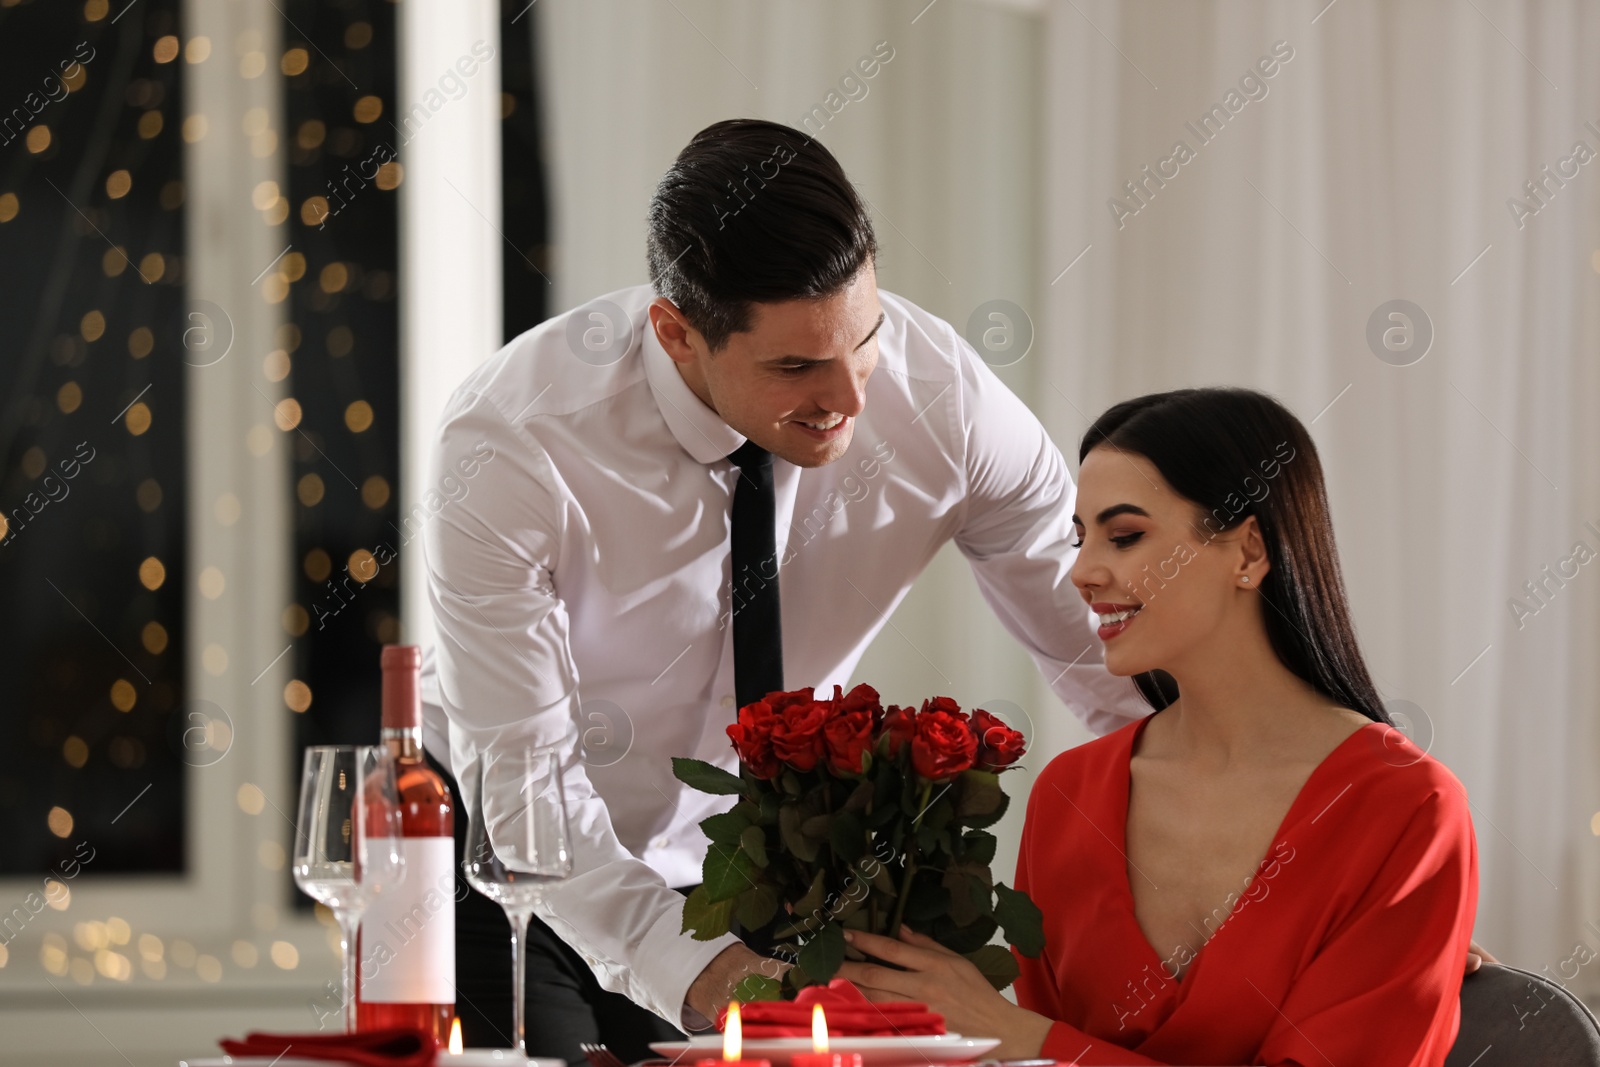 Photo of Man presenting roses to his beloved woman in restaurant. Romantic Valentine's day dinner